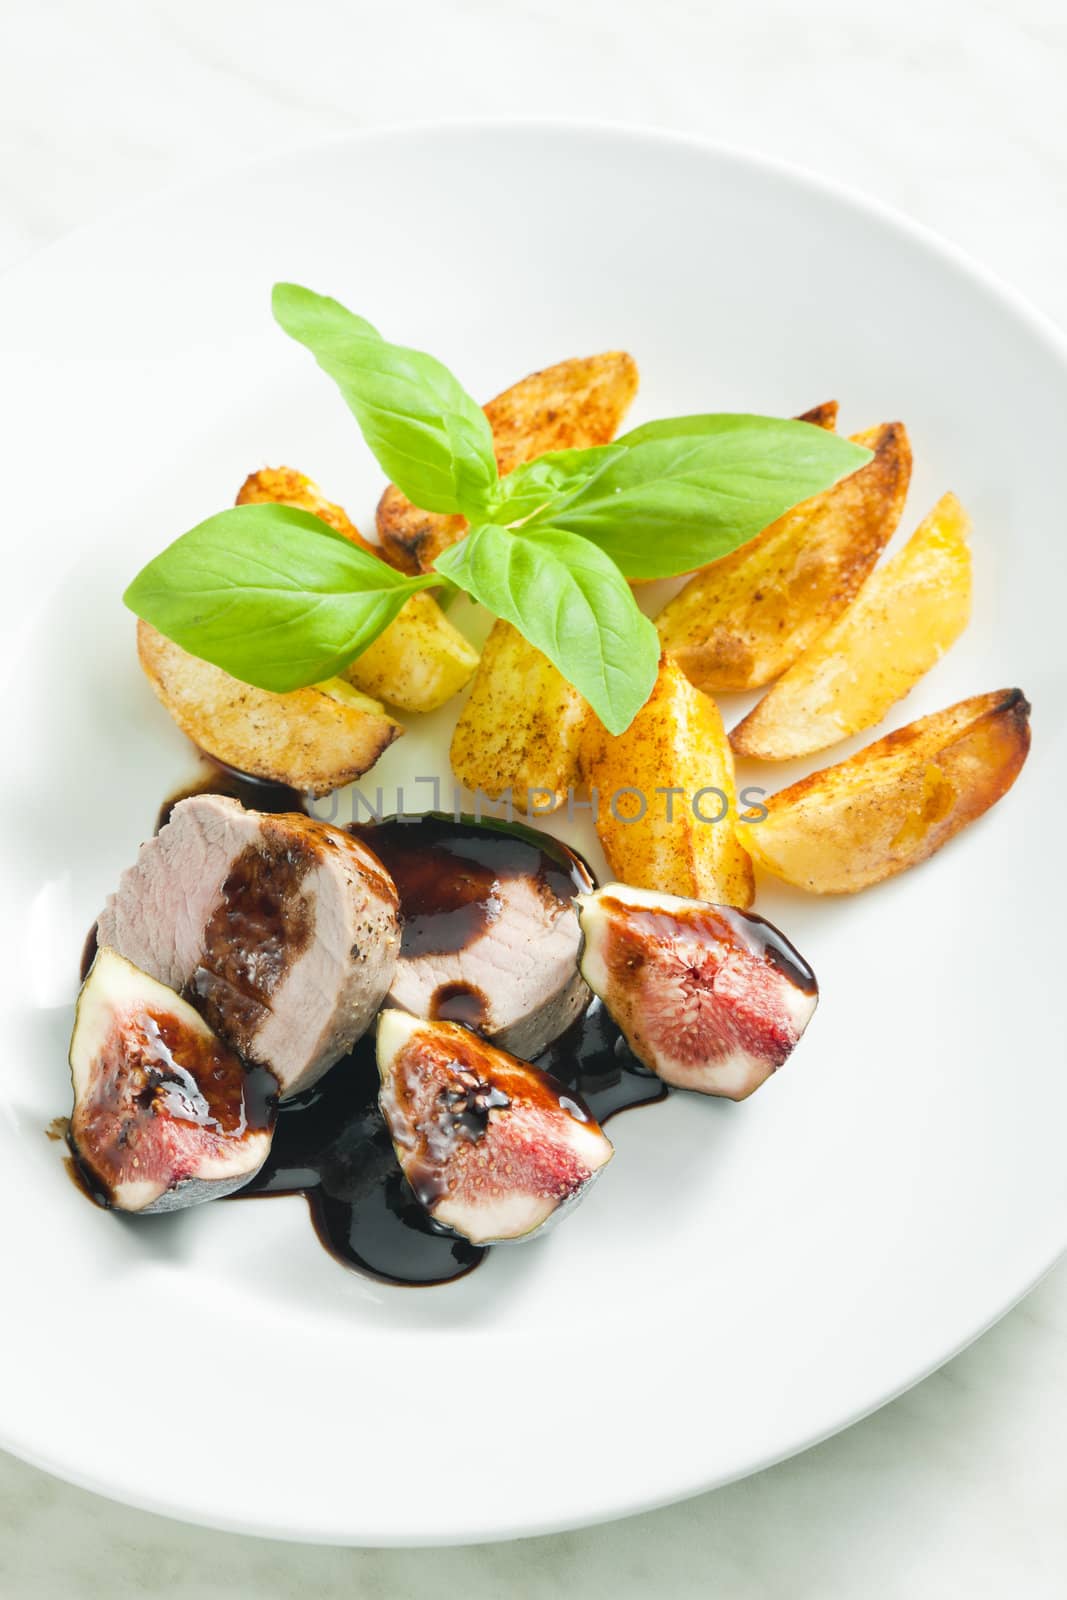 pork tenderloin with figs and sauce of balsamico vinegar by phbcz